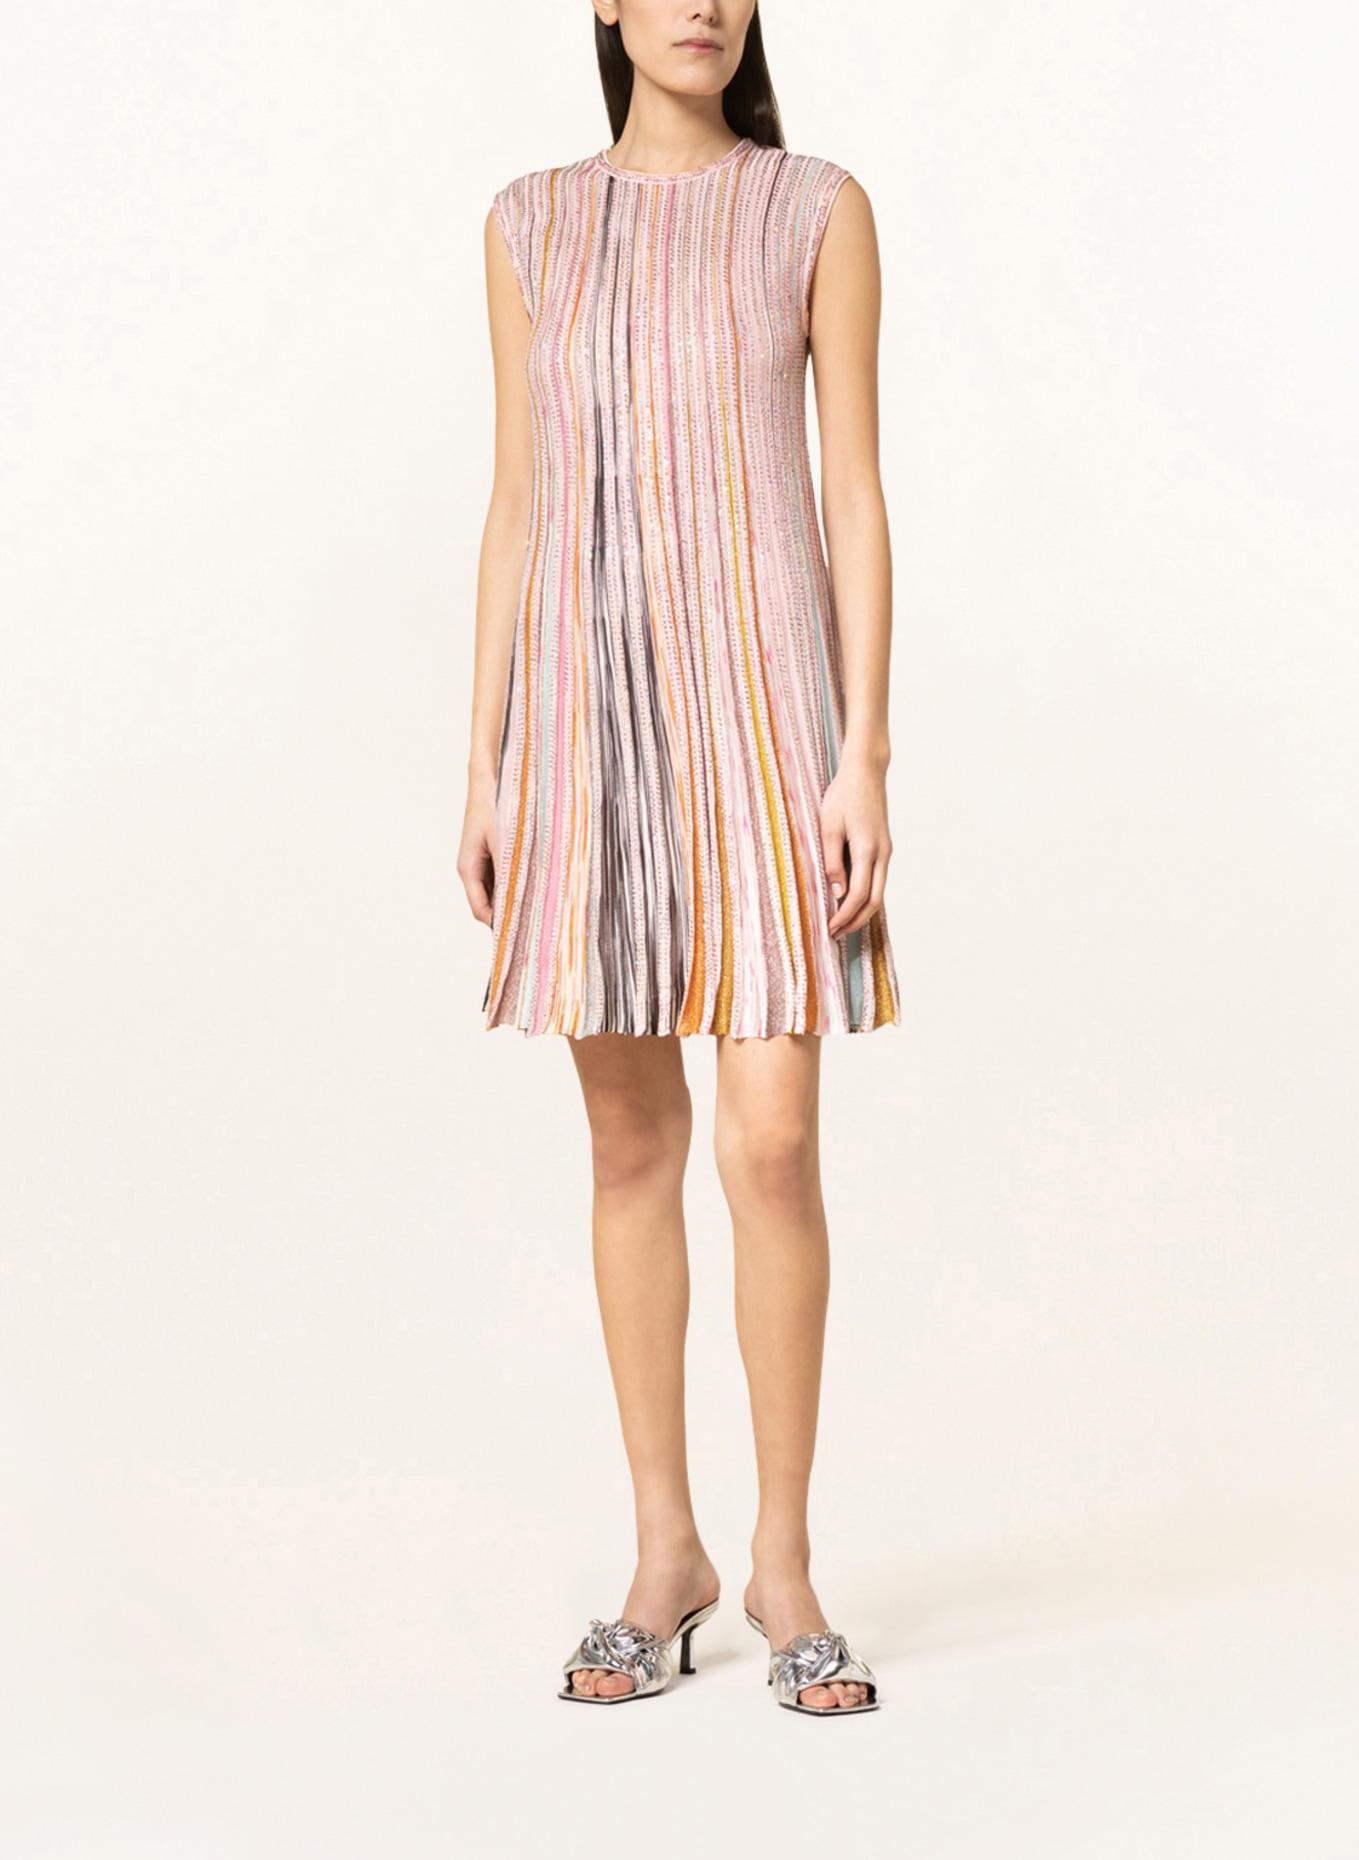 MISSONI Silk dress with glitter thread and sequins, Color: LIGHT PINK/ PINK/ DARK YELLOW (Image 2)